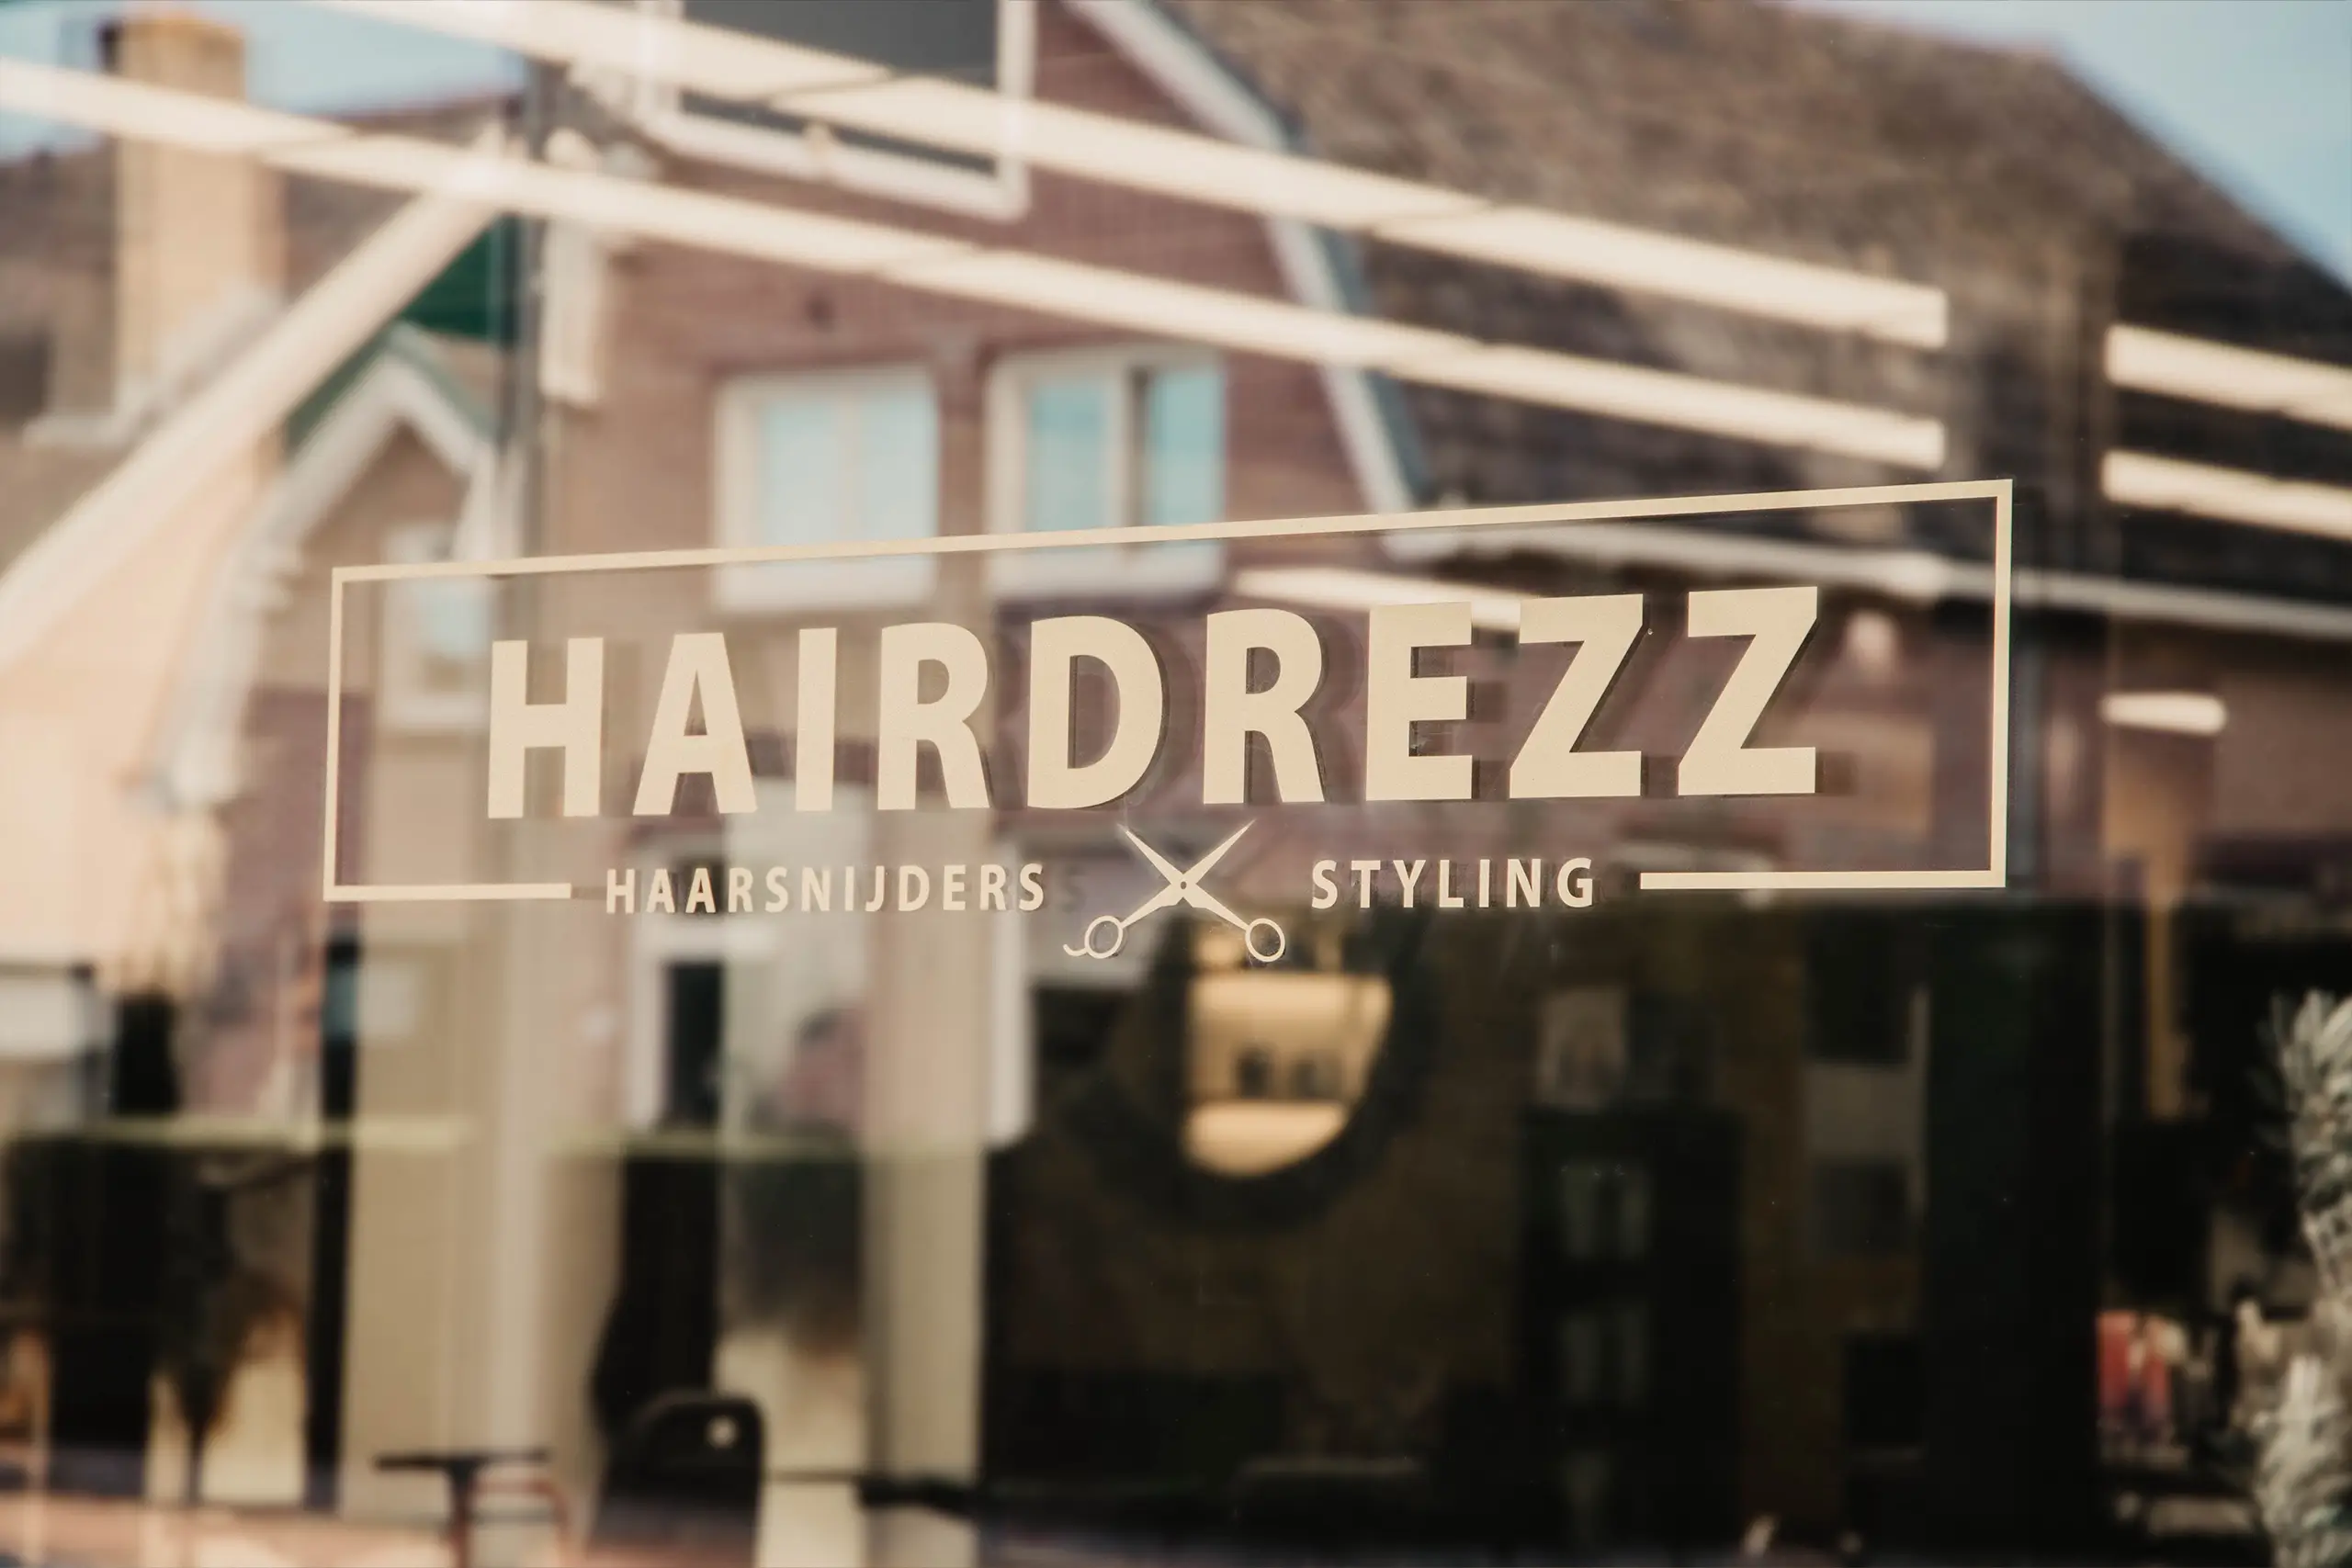 Hairdrezz Haarsnijders & Styling